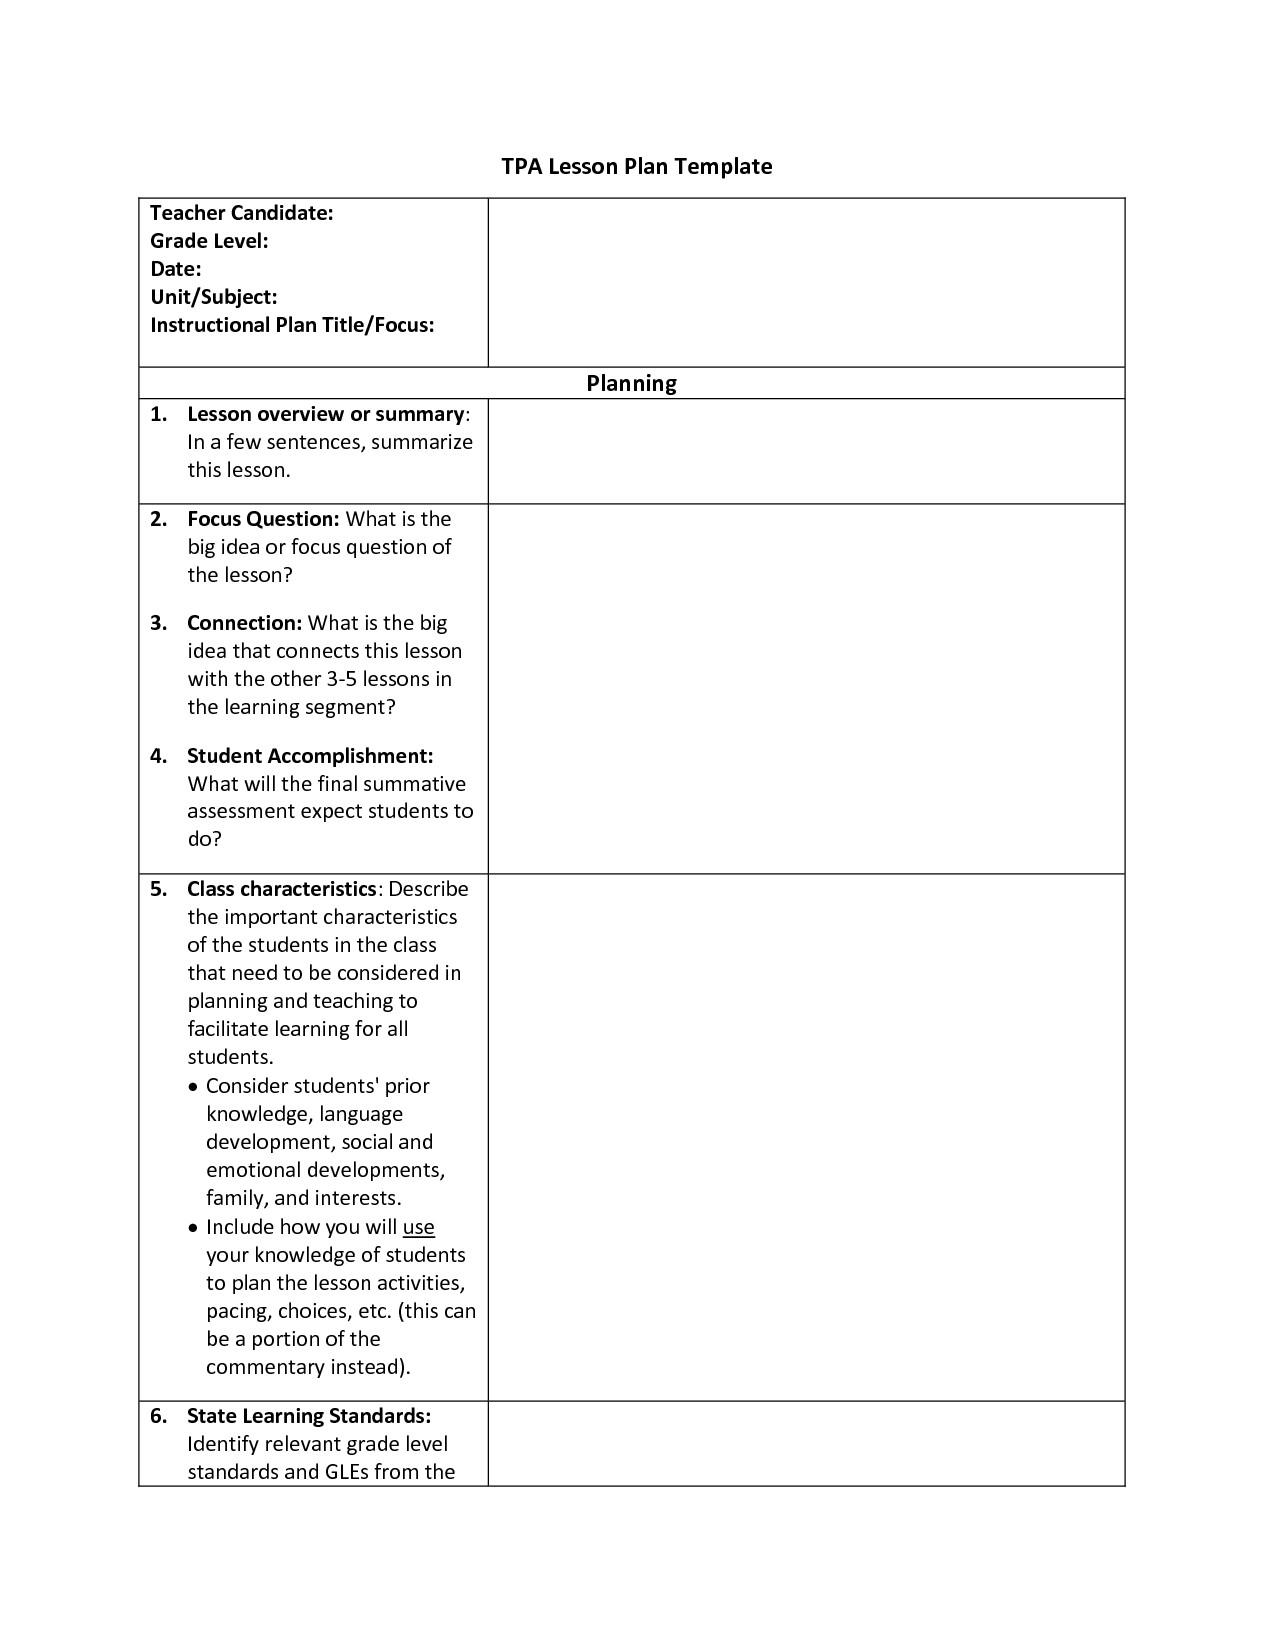 Edtpa Lesson Plan 16 Best Of Cursive Writing Worksheets for 3rd Grade